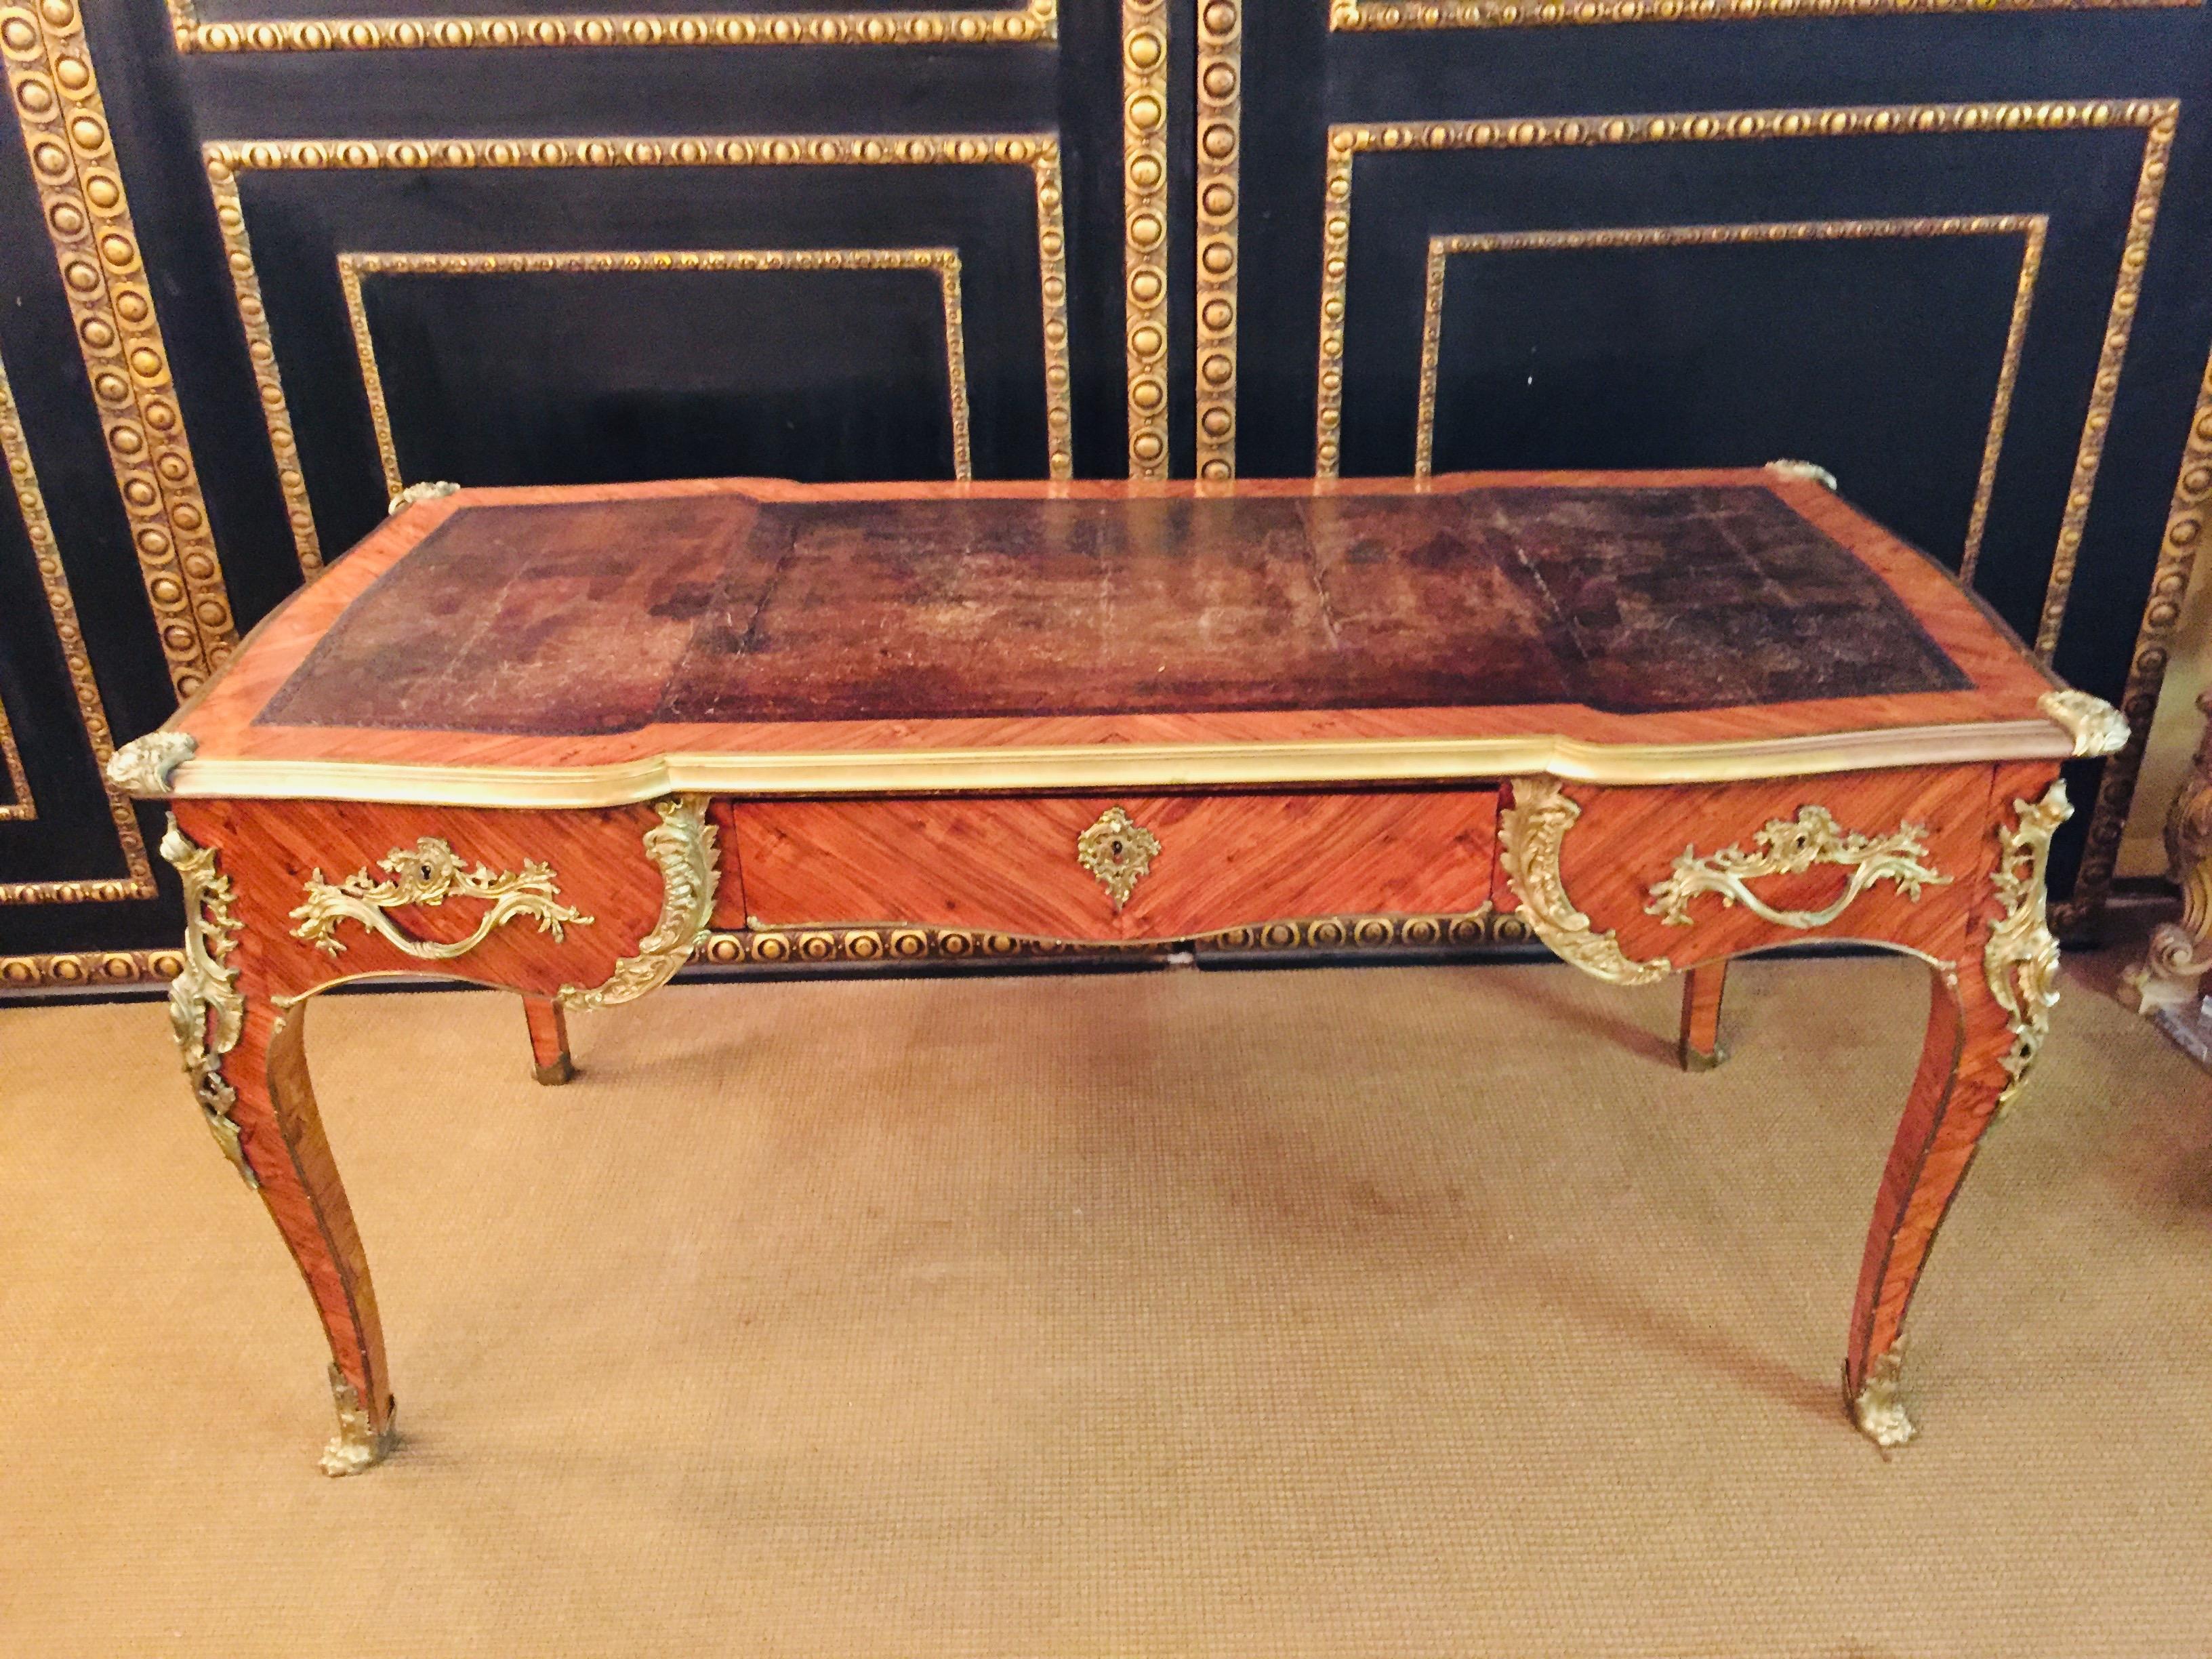 Bureau plat in the style of the Louis XV Napoleon III Paris, circa 1850-1880. In Bois-Satiné veneer, all-round full-length mirror veneer with seed beads. With very finely chiselled, highly decorative, restrained fire-gilt bronze fittings. Rosewood